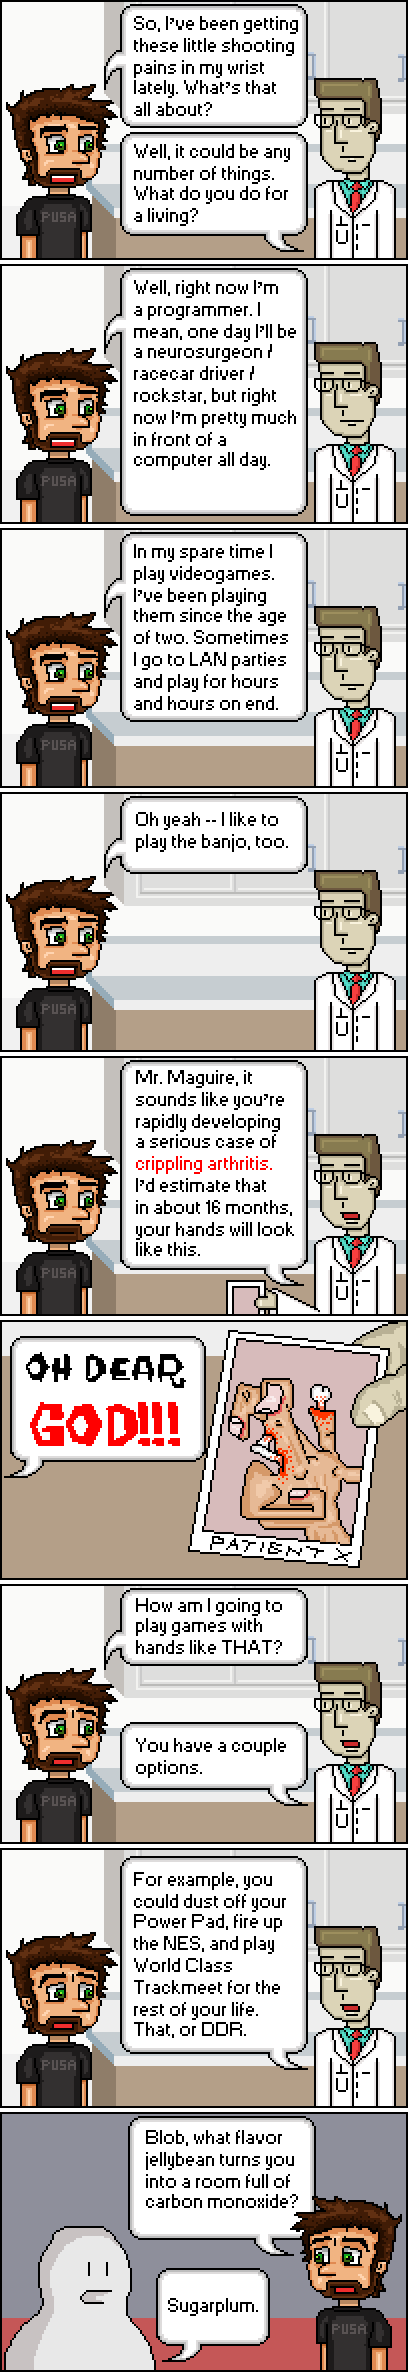 Hypercombofinish Comic #8 by Chris Maguire 